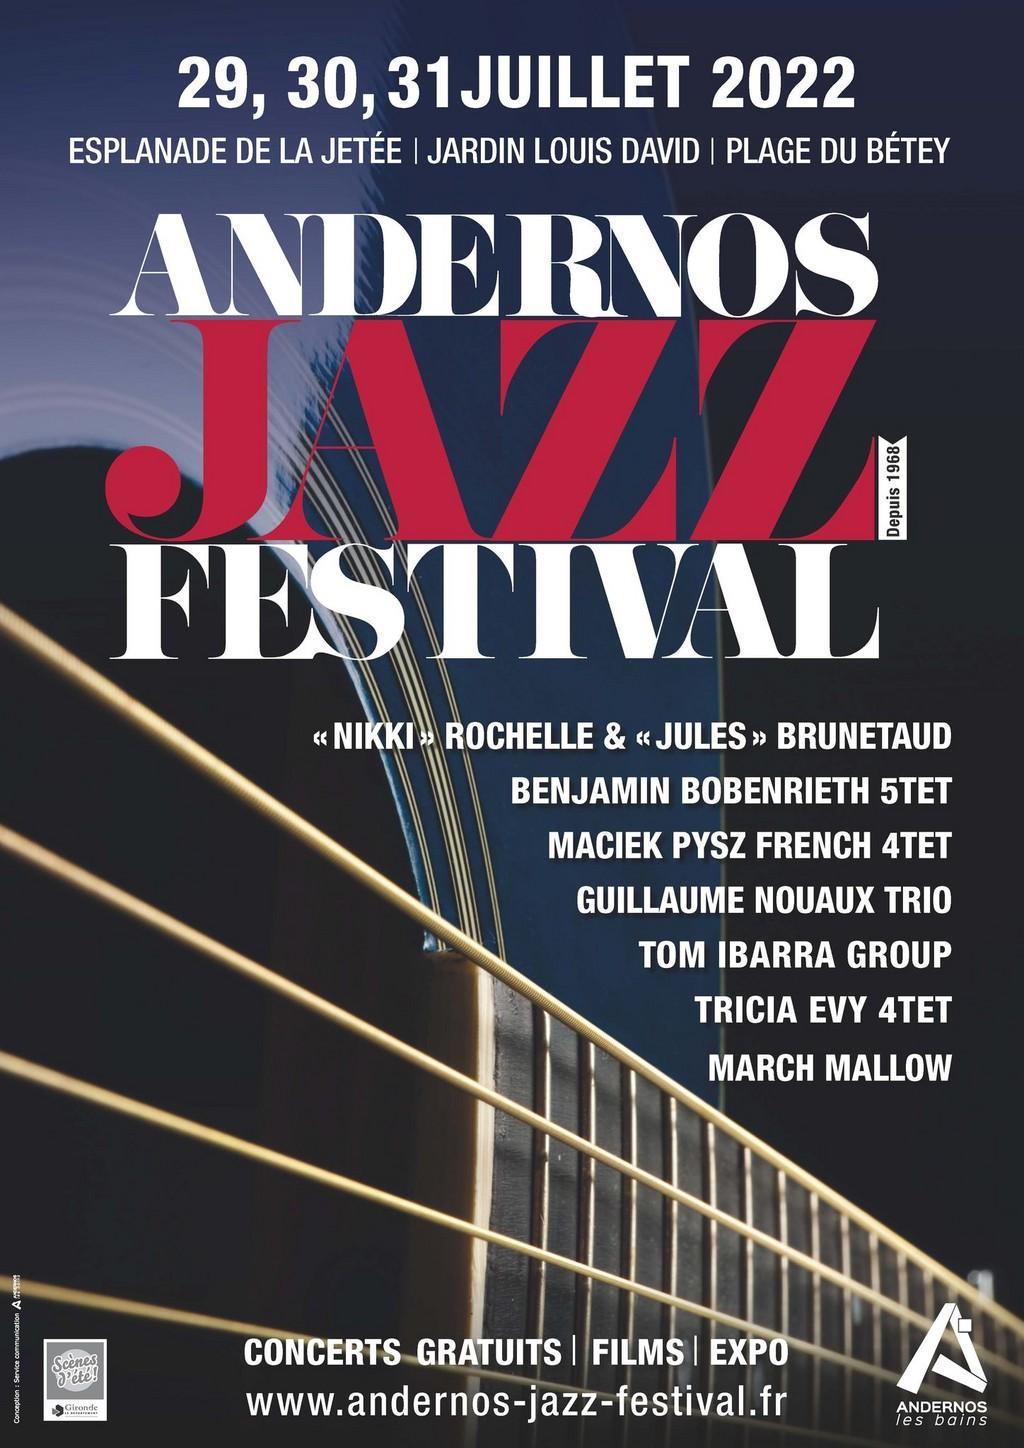 Lineup Poster Andernos Jazz Festival 2022